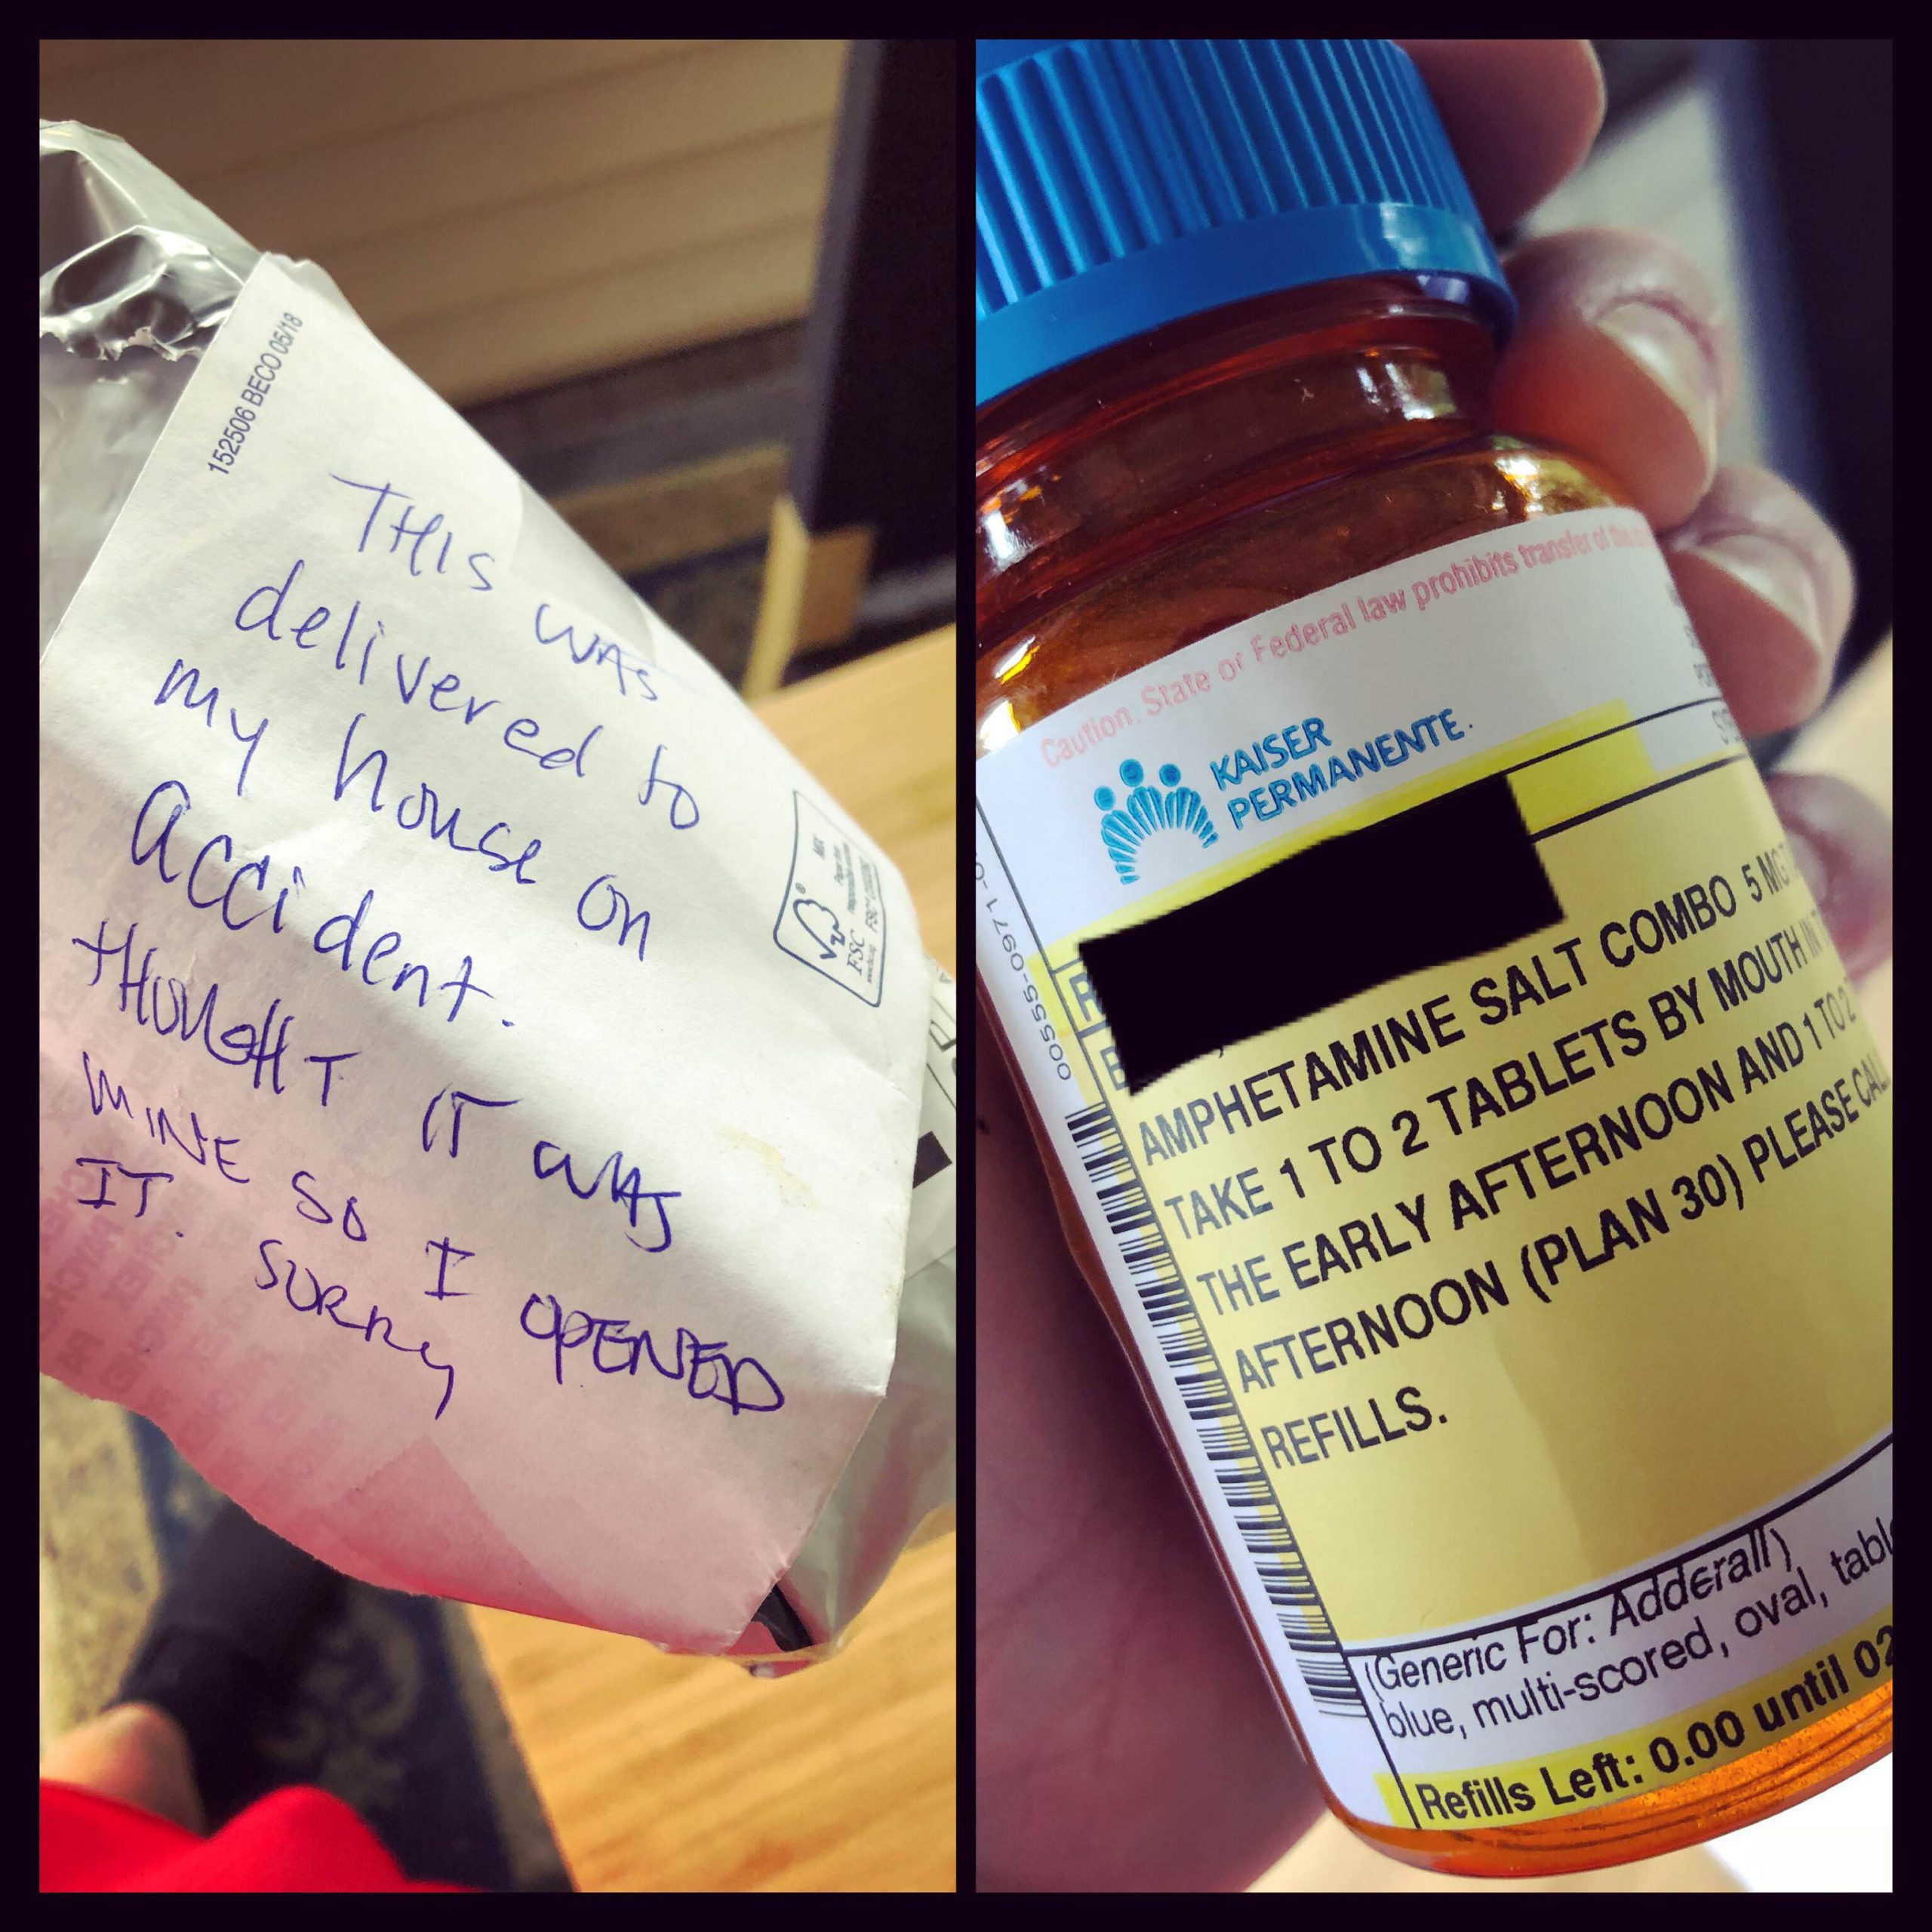 My Adderall prescription comes by mail. 150 tablets. It ...